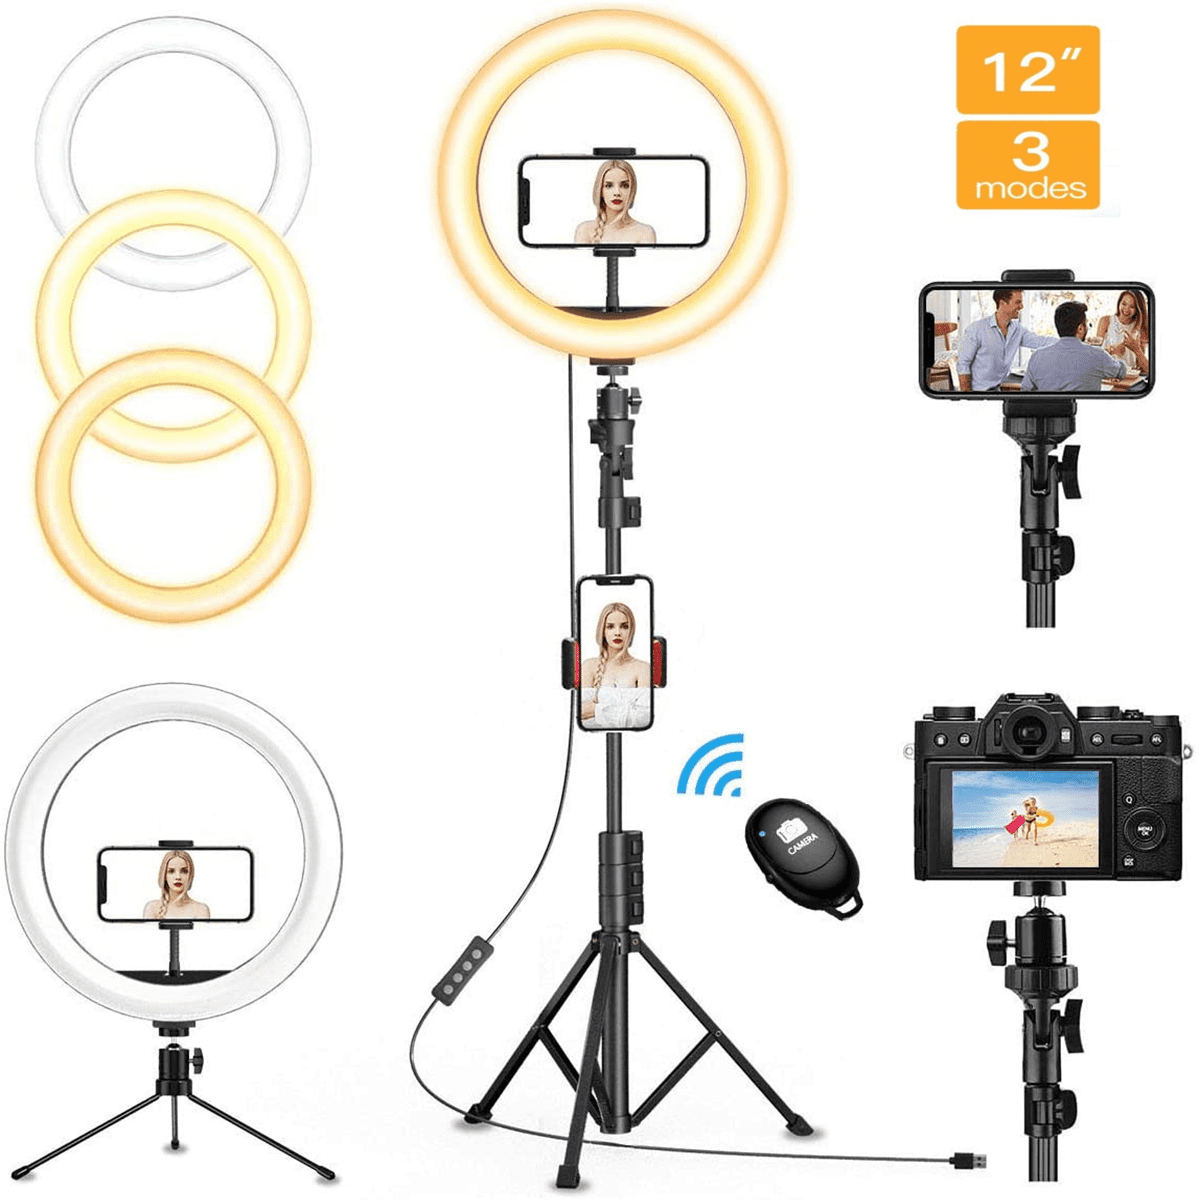 3 Lighting Modes and 11 Brightness Levels 16.56 to 53.5 Ring Light for YouTube Video/Live Stream/Makeup/Photography Selfie Ring Light 10.2 Ring Light with Stand and Phone Holder Adjustable